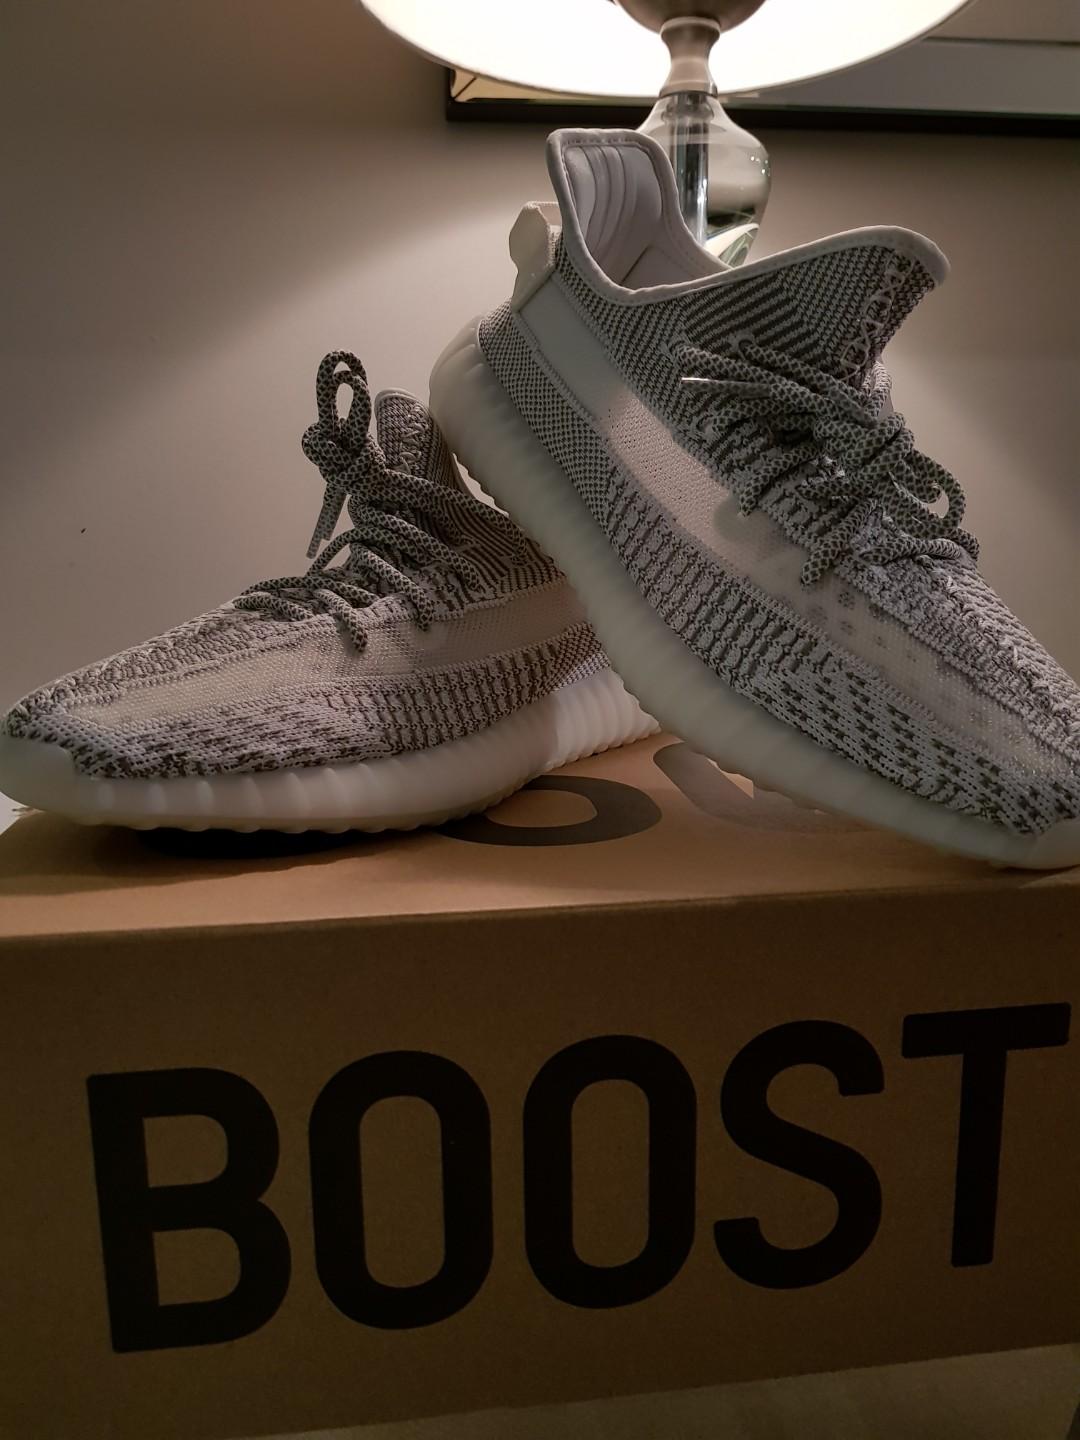 dhgate yeezy boost